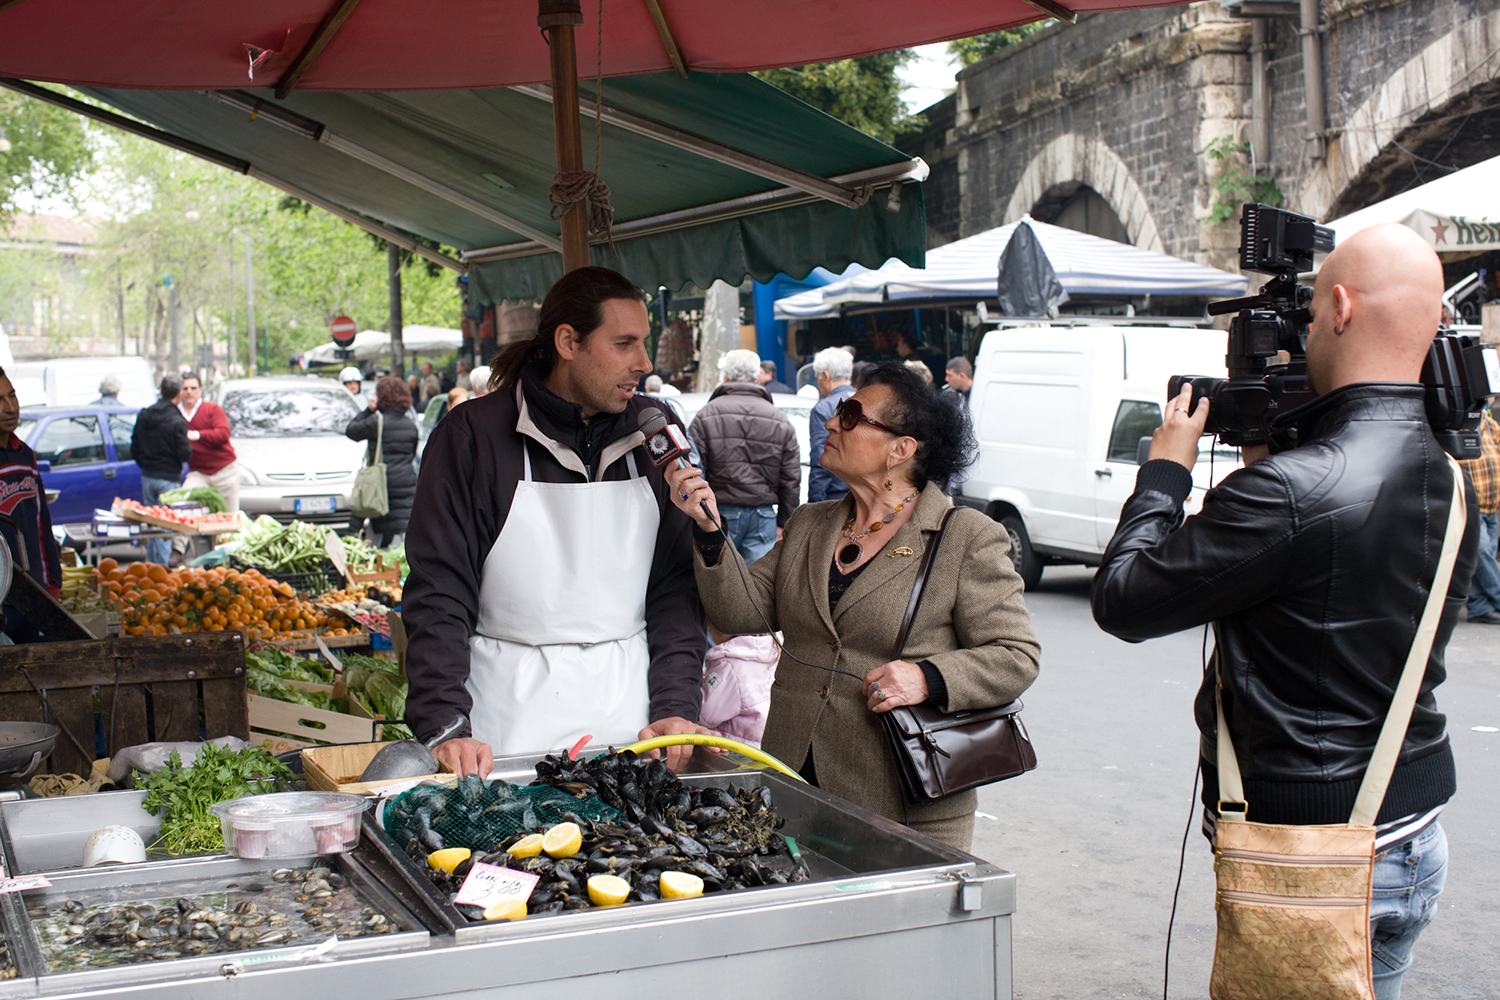  Because it was Good Friday, the television news showed up to interview fishmongers and customers. 